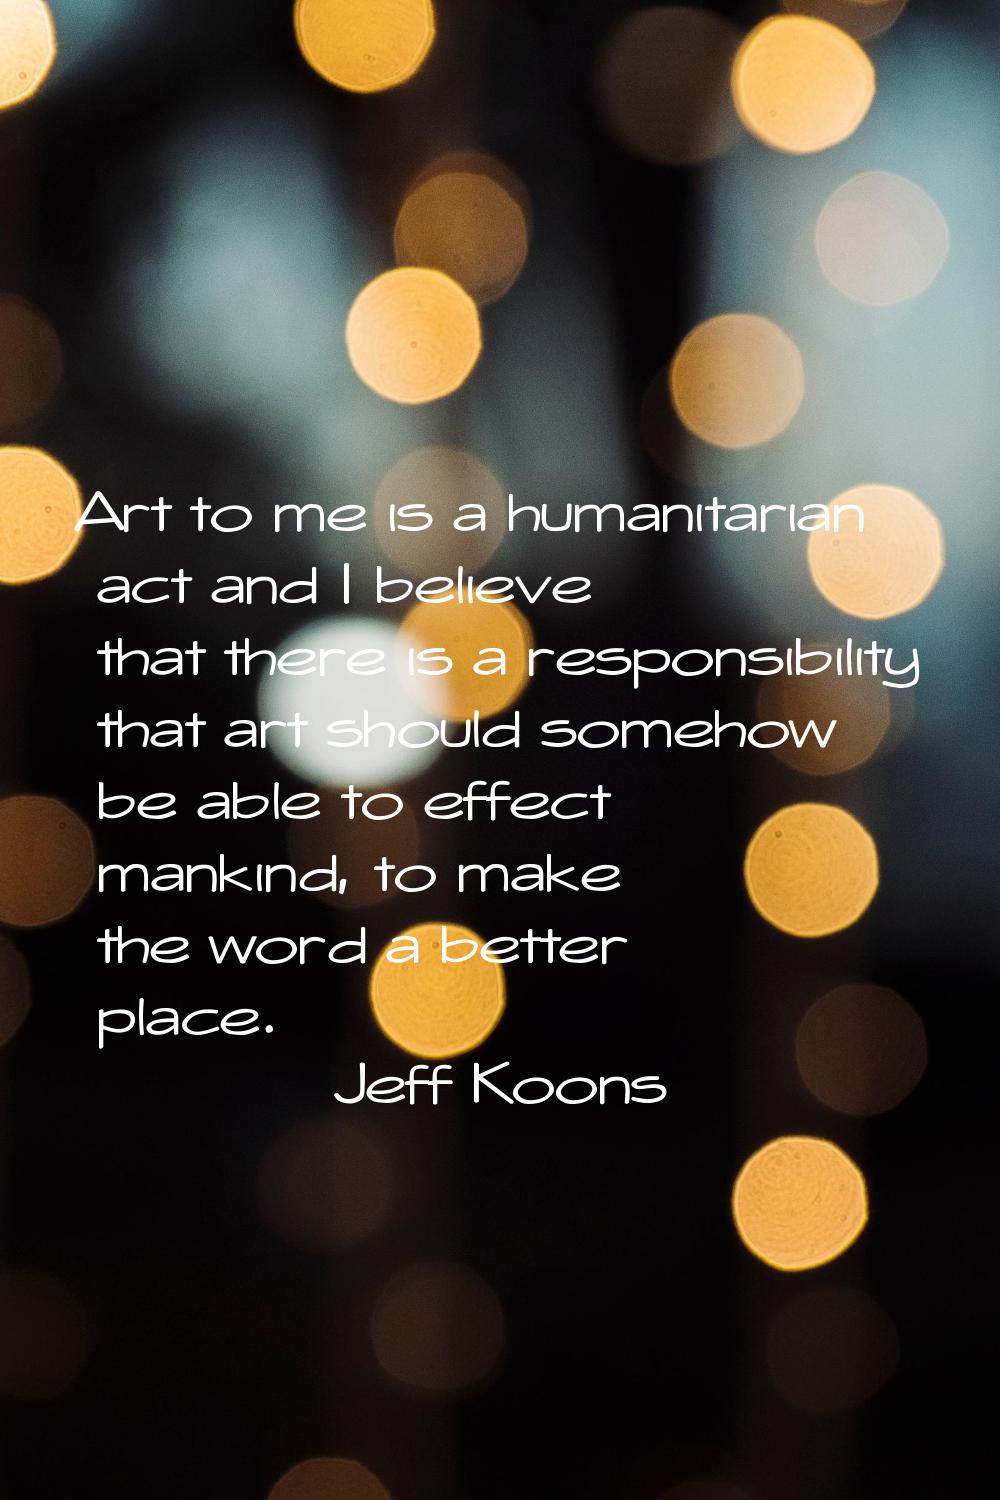 Art to me is a humanitarian act and I believe that there is a responsibility that art should someho